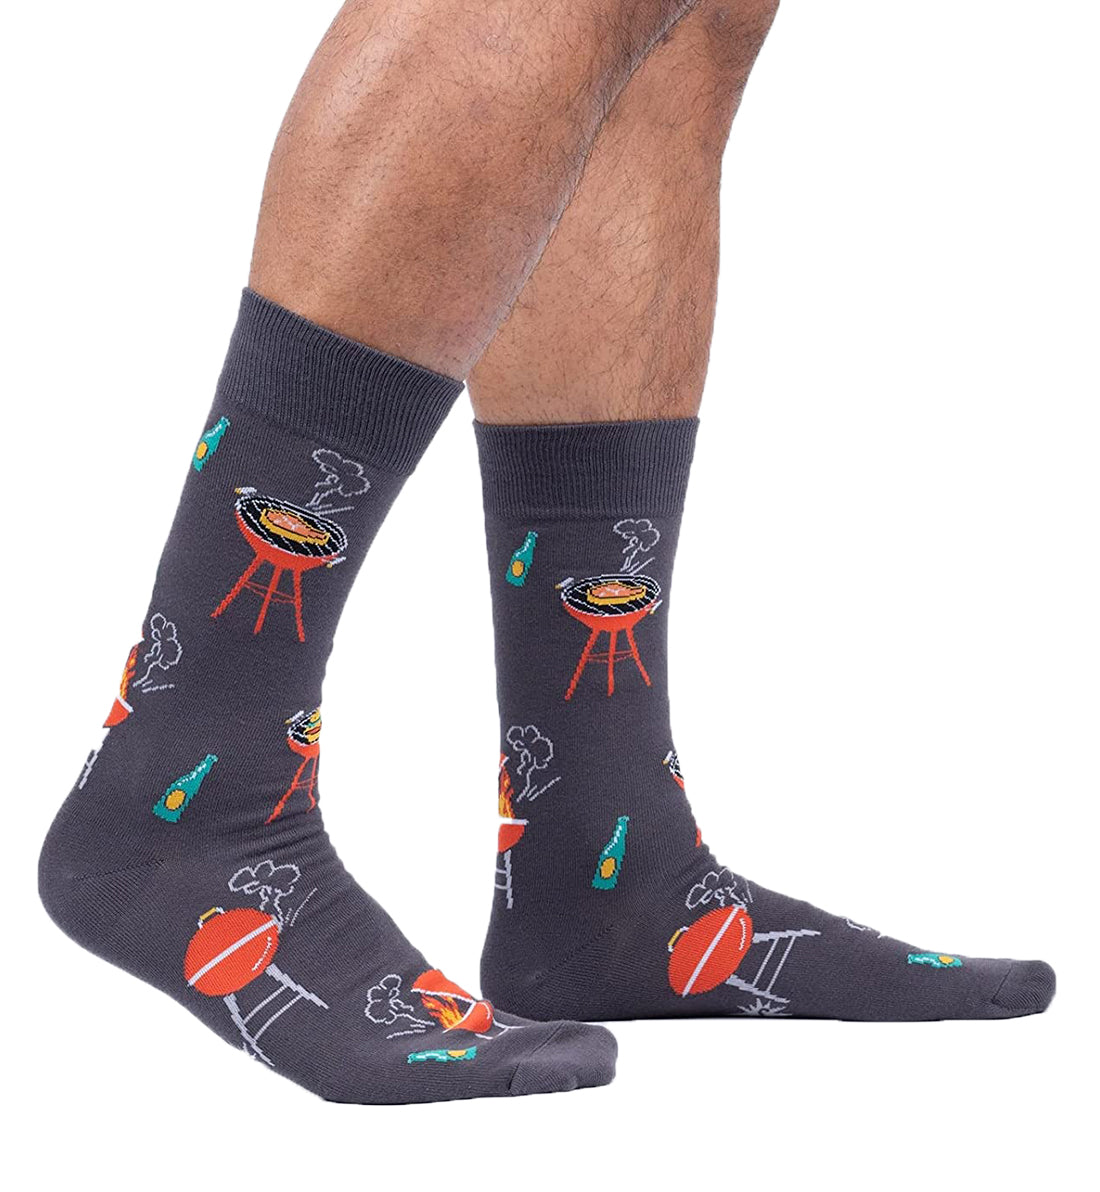 SOCK it to me Men&#39;s Crew Socks (MEF0565),The Steaks are High - The Steaks are High,One Size